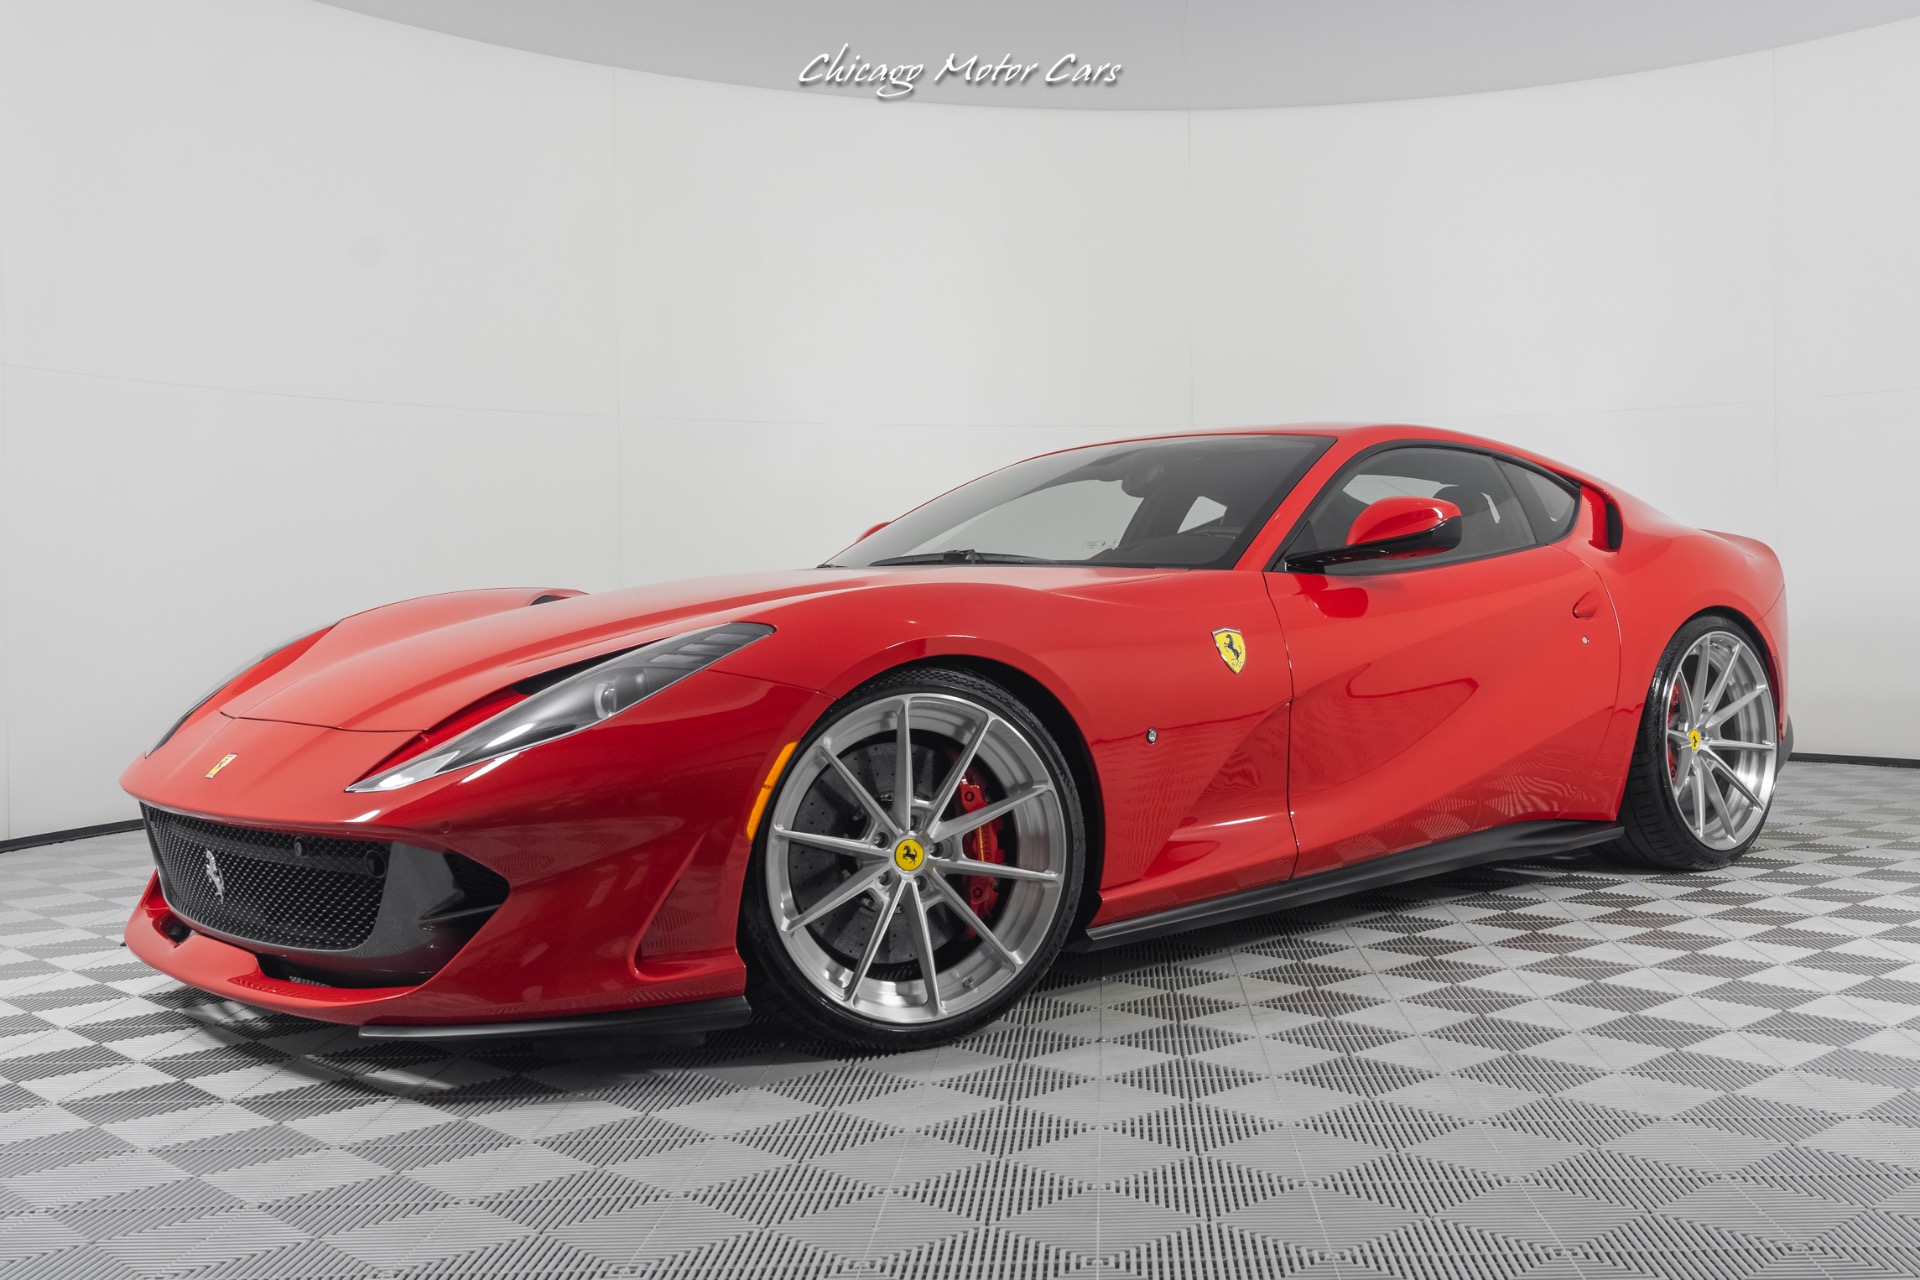 Used-2019-Ferrari-812-Superfast-Coupe-Only-6k-Miles-Anrky-Wheels-Carbon-Steering-Wheel-Front-PPF